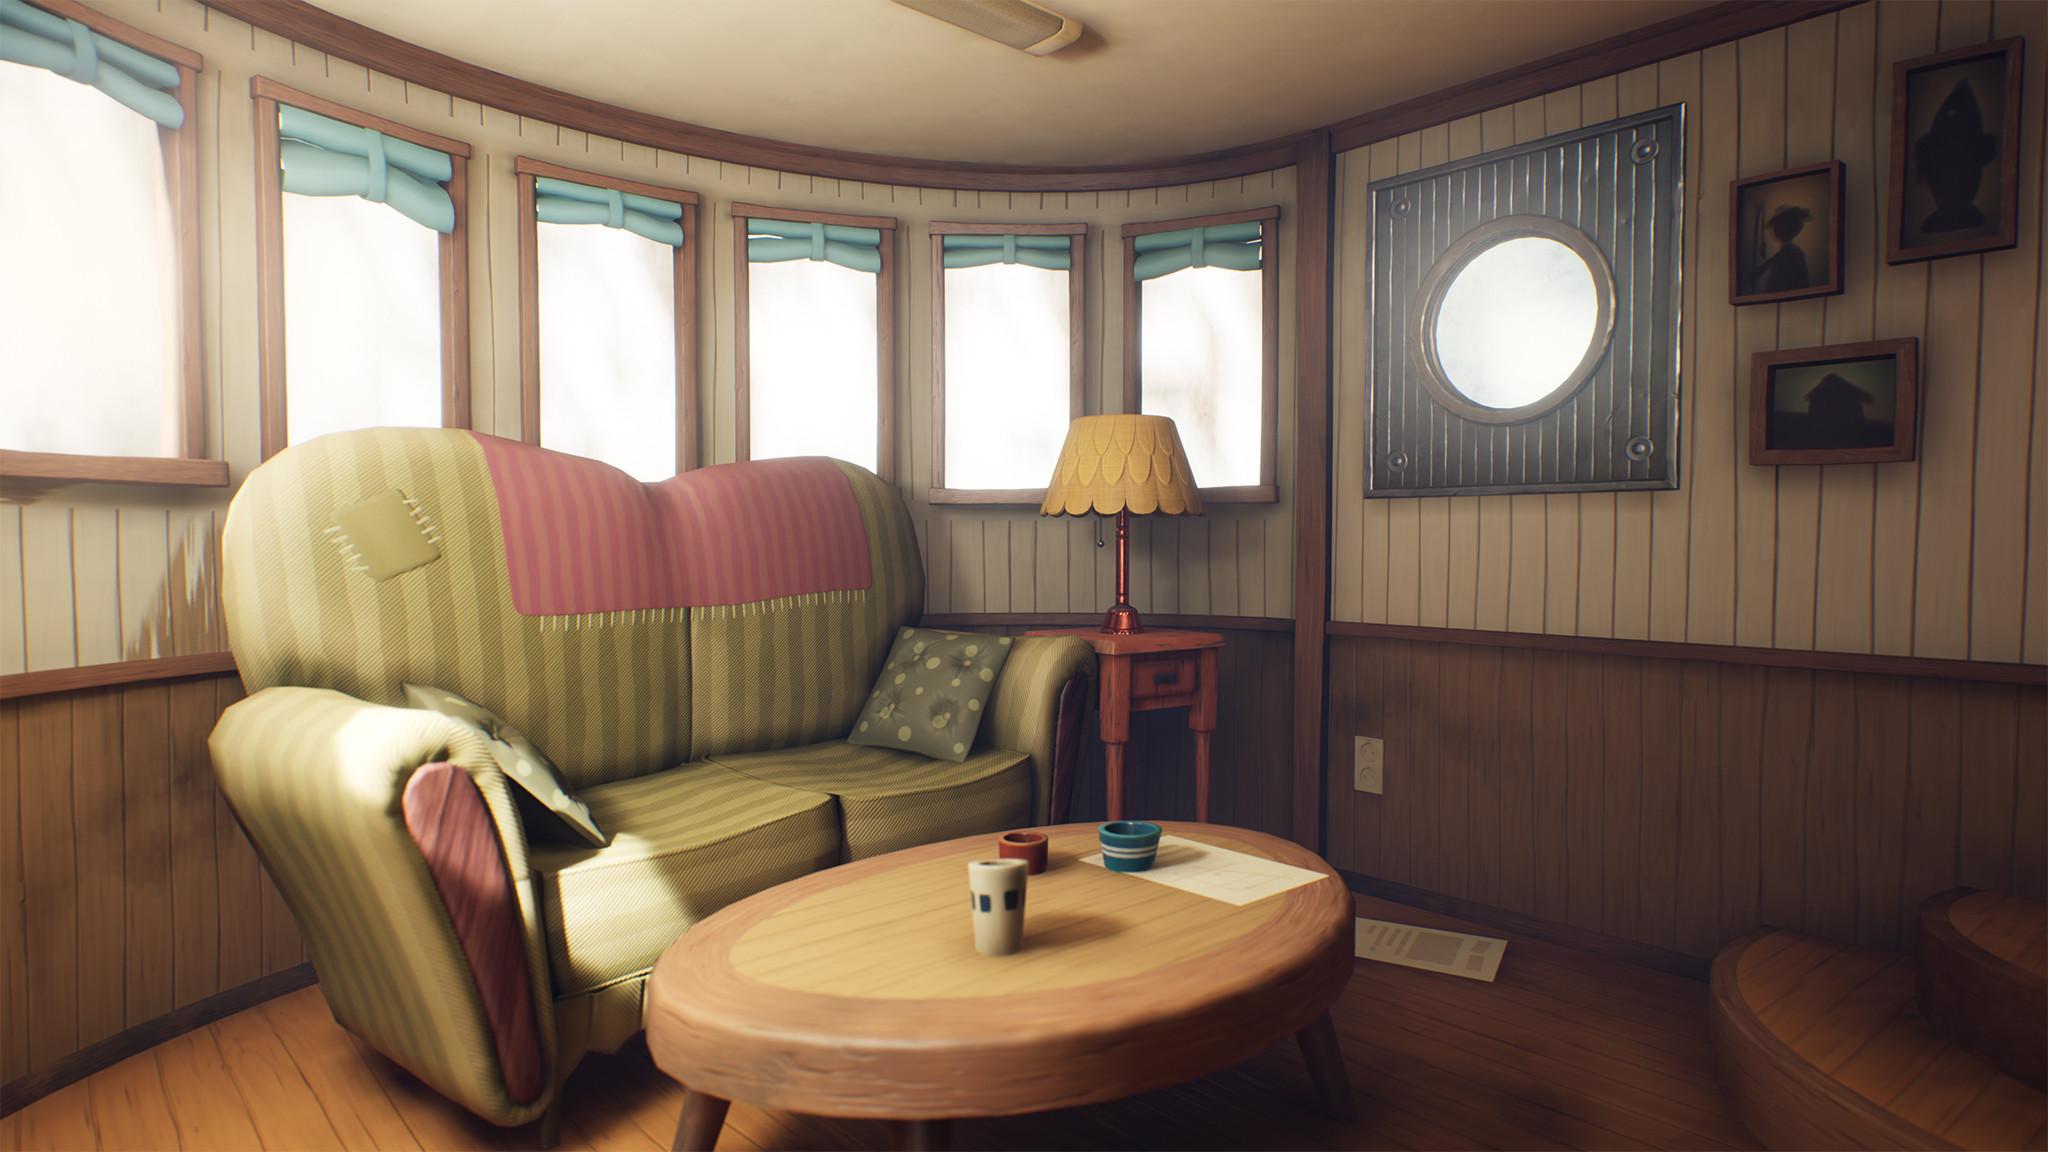 A render of a stylized tugboat interior living room